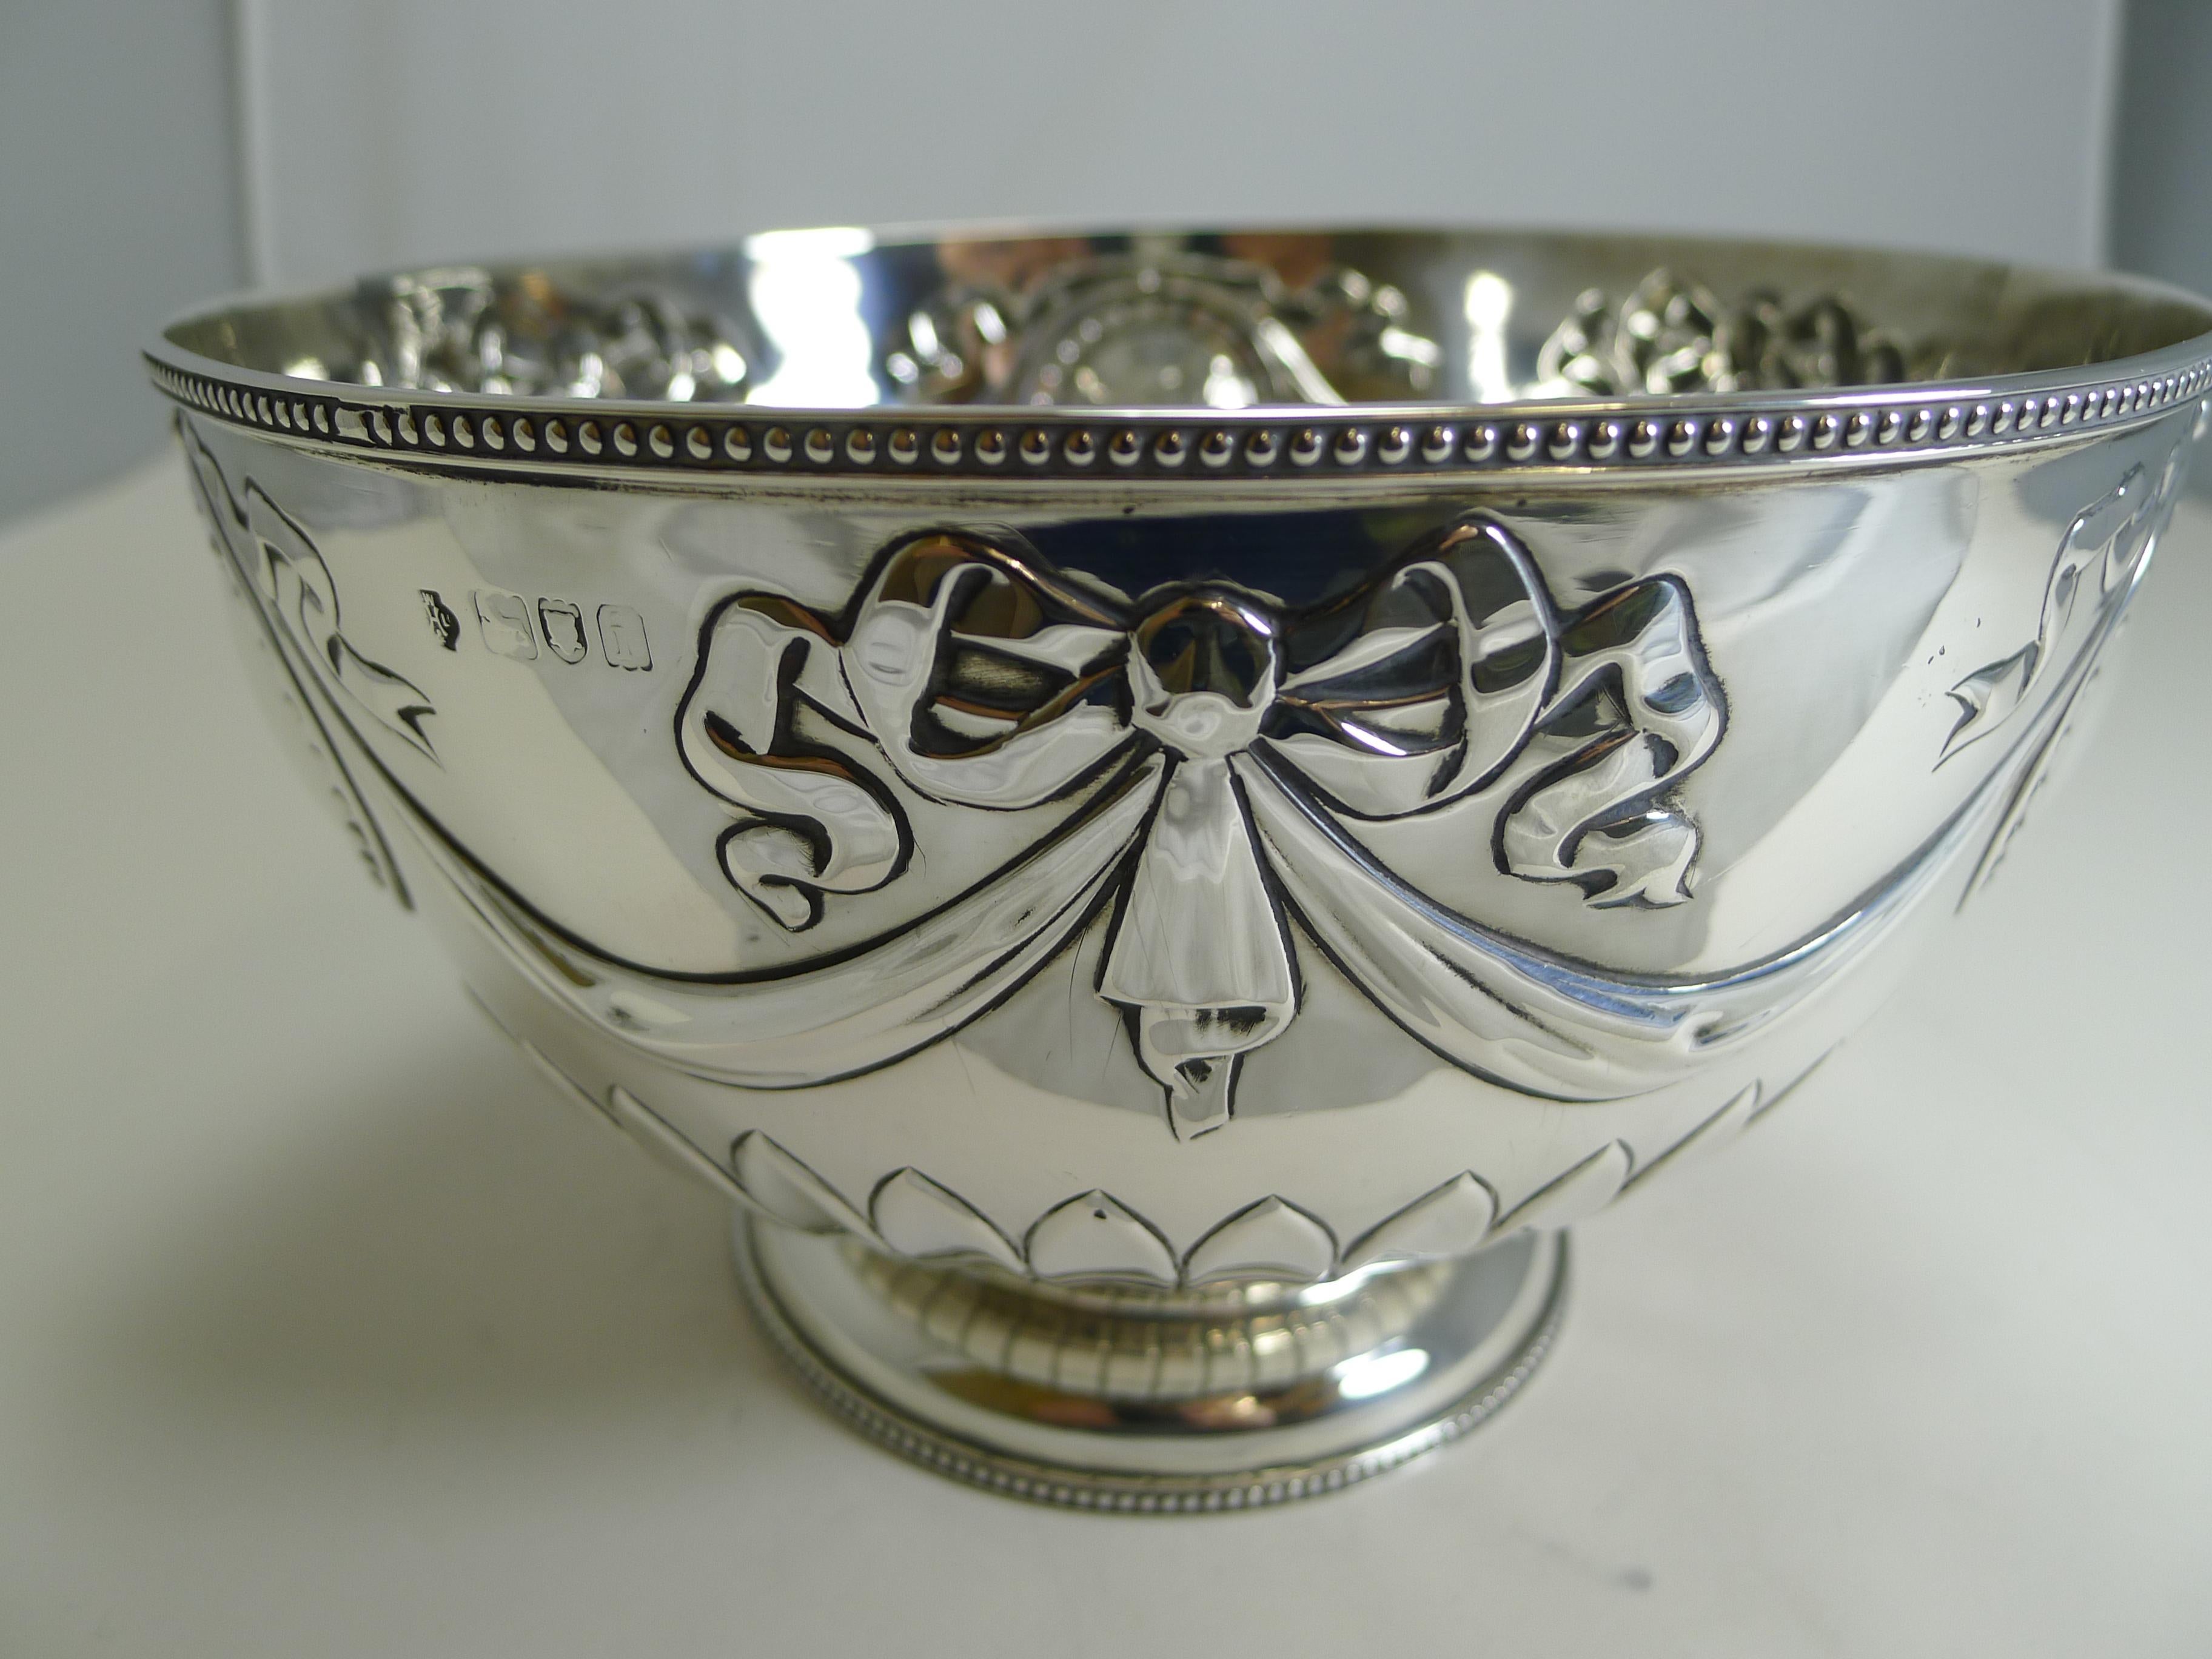 Edwardian Antique English Sterling Silver Bowl by William Hutton, 1904